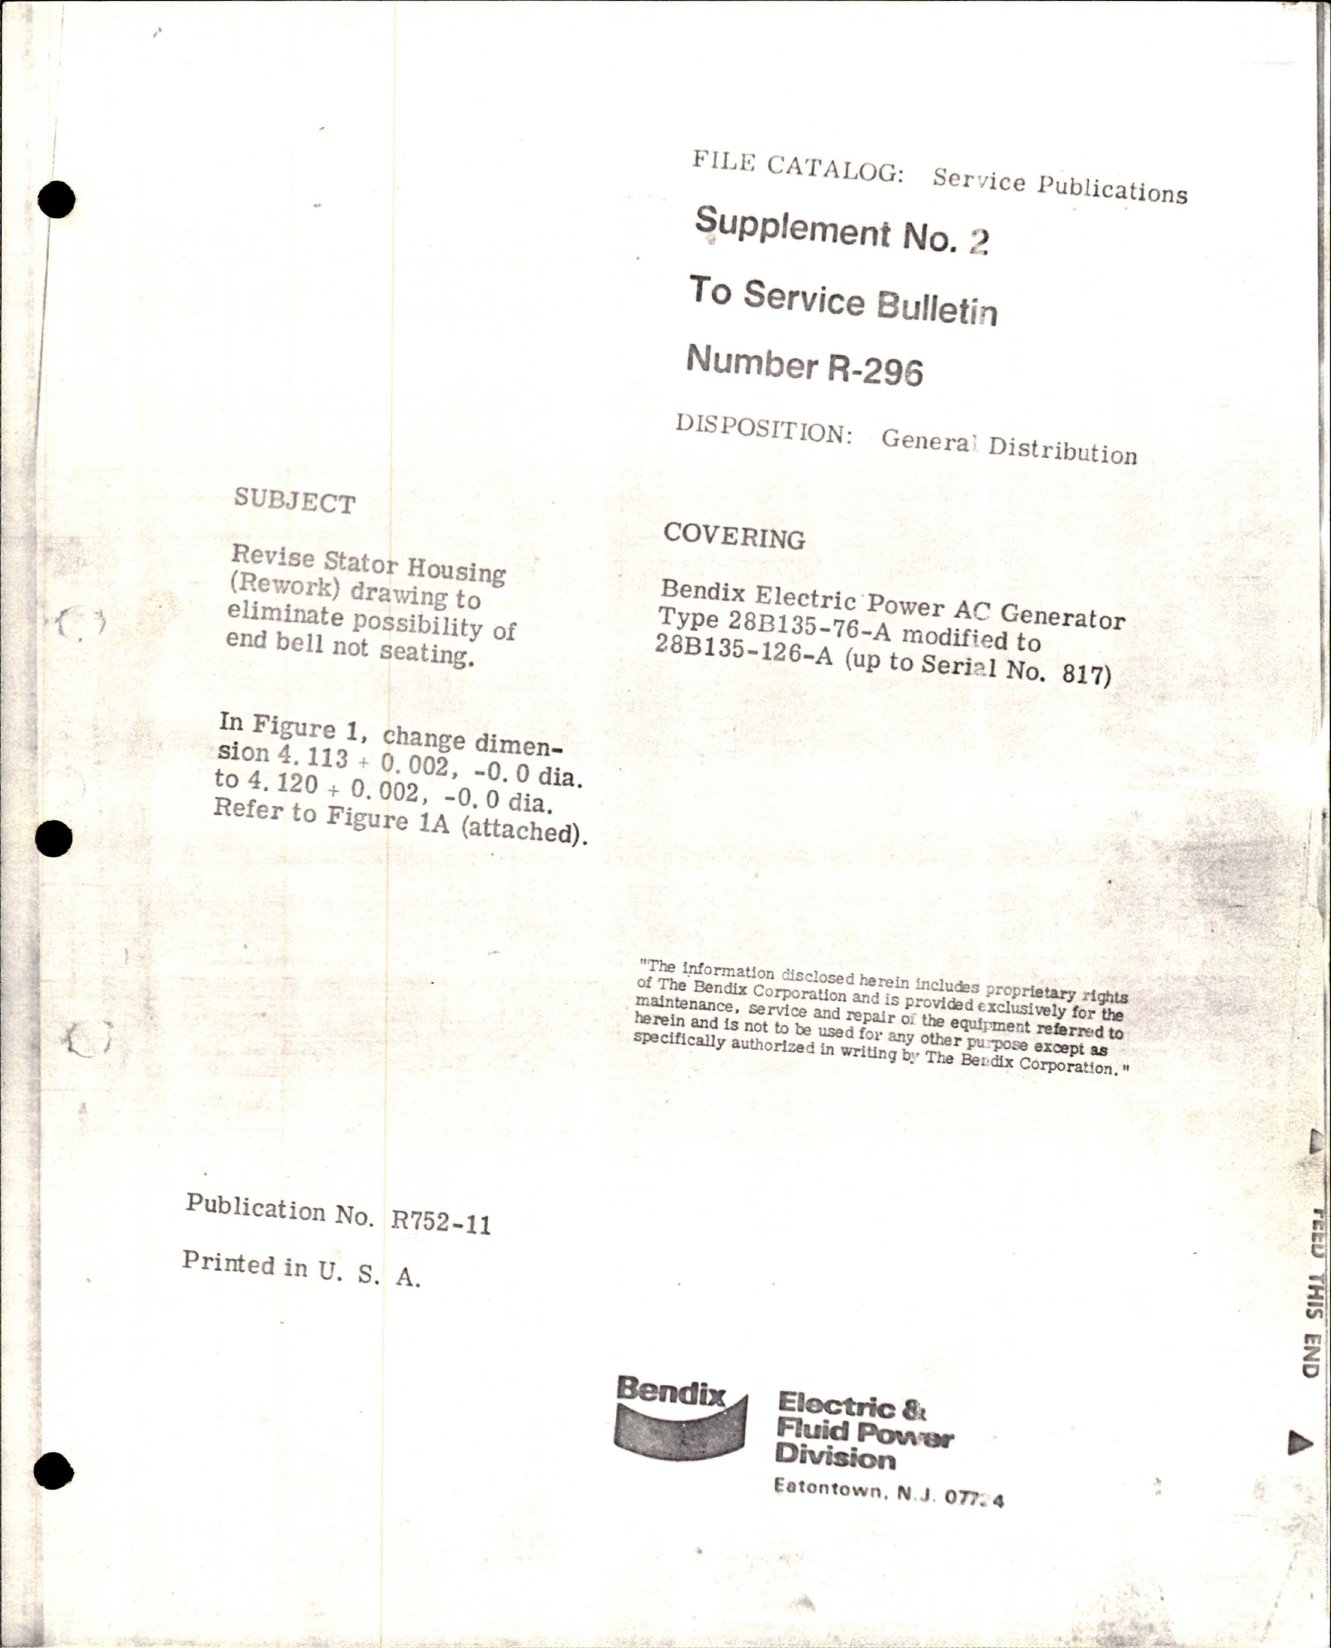 Sample page 1 from AirCorps Library document: Supplement No. 2 to Service Bulletin R-296 - AC Generator - Type 28B135-76-A